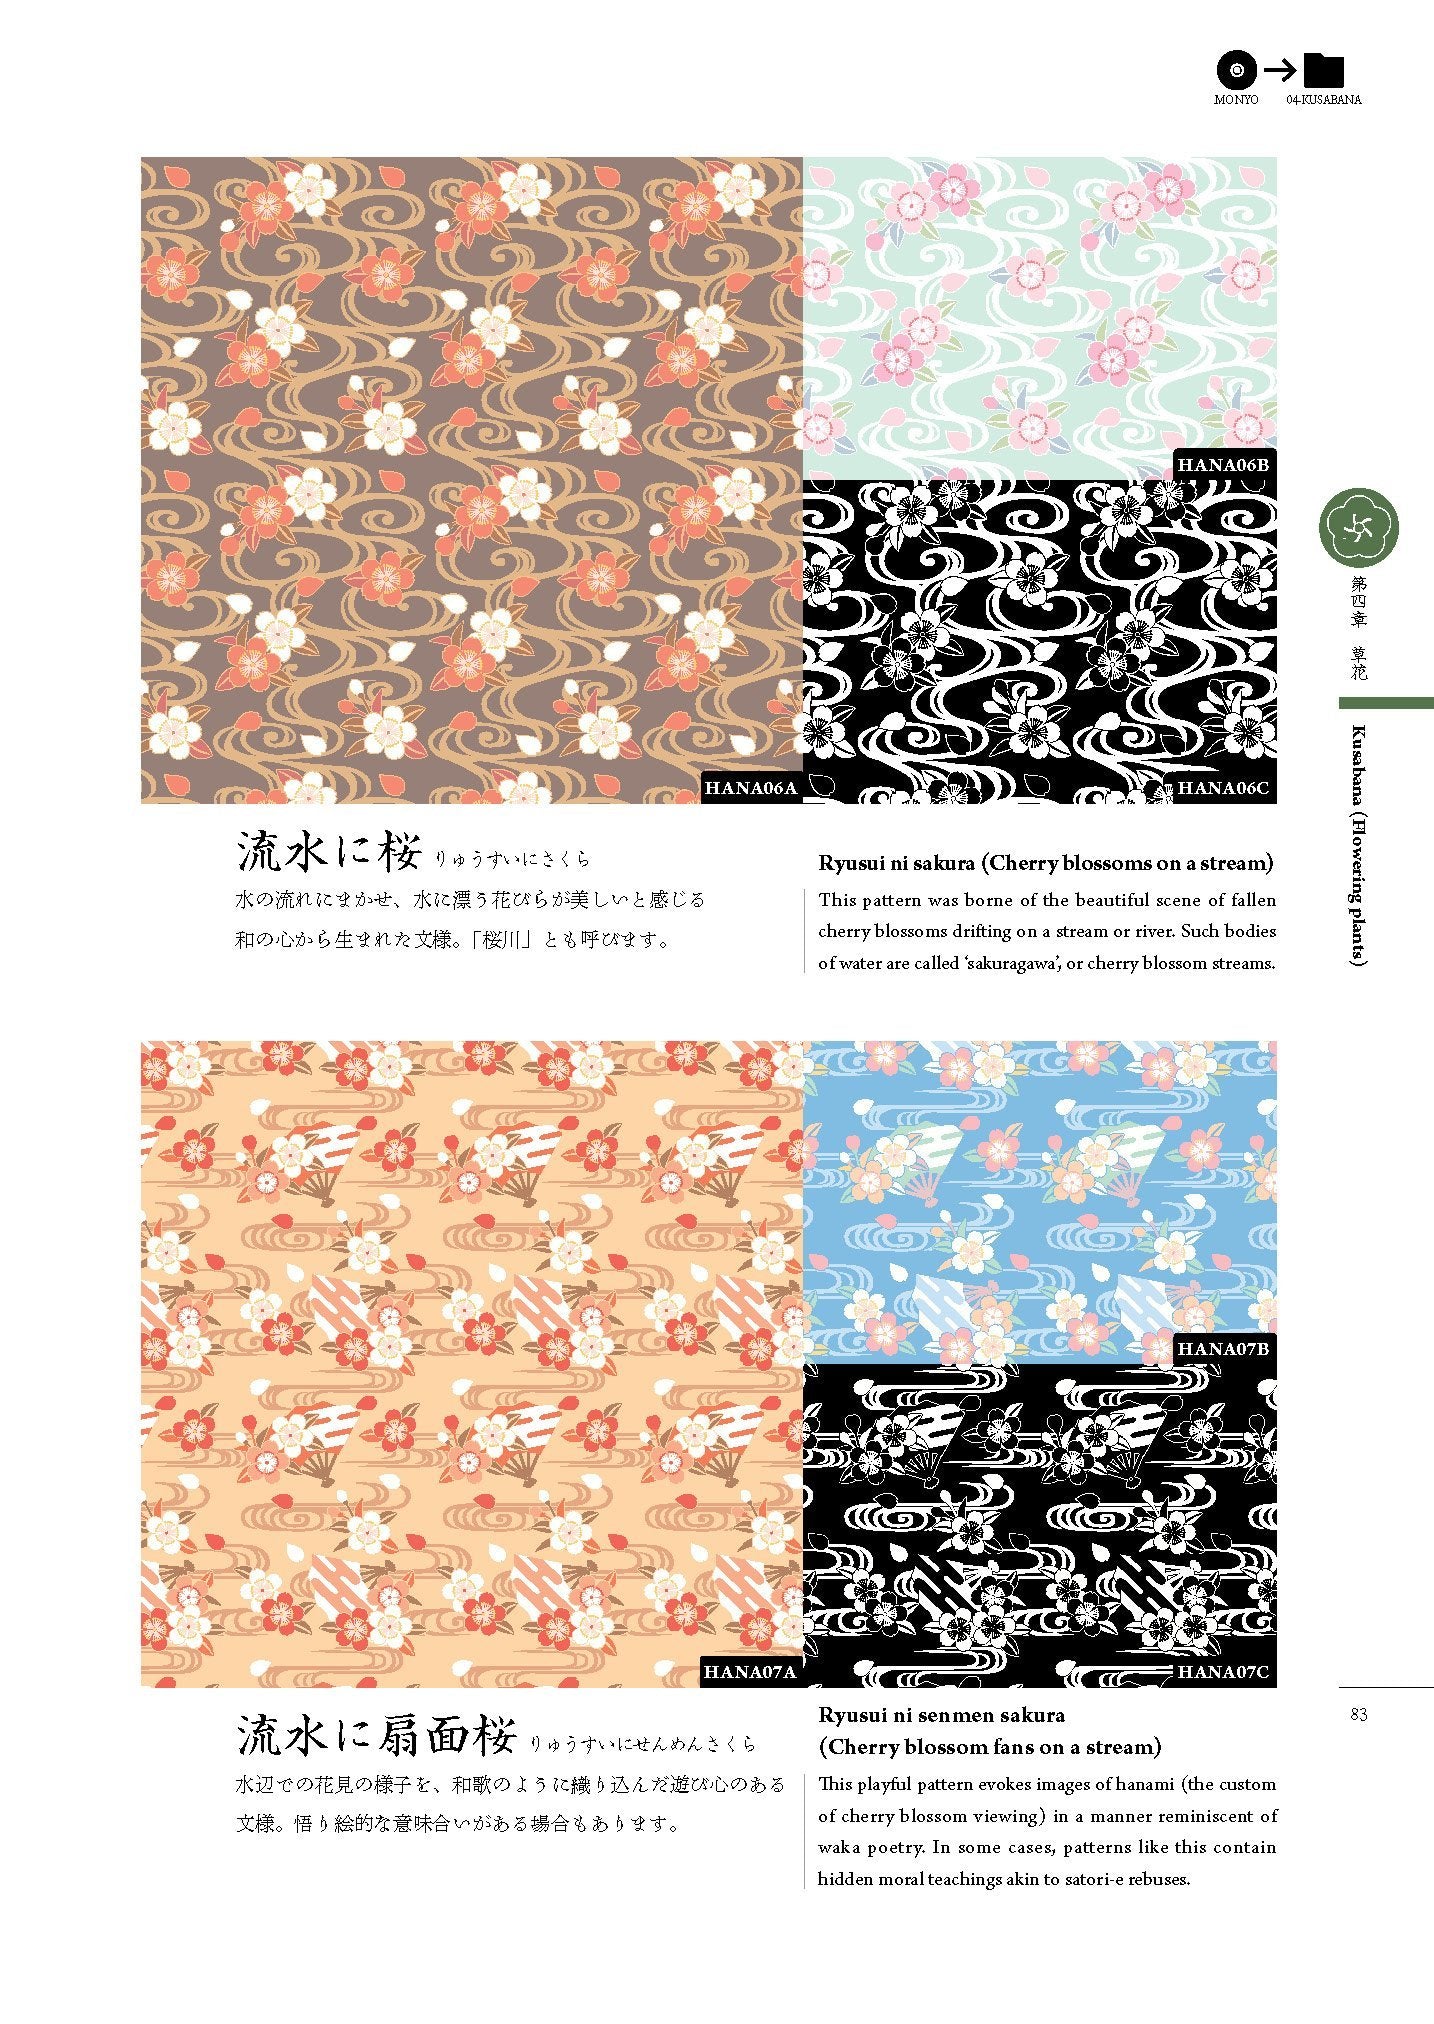 Yun Beauty Tradition of Japan Brought Up (origami Paper )